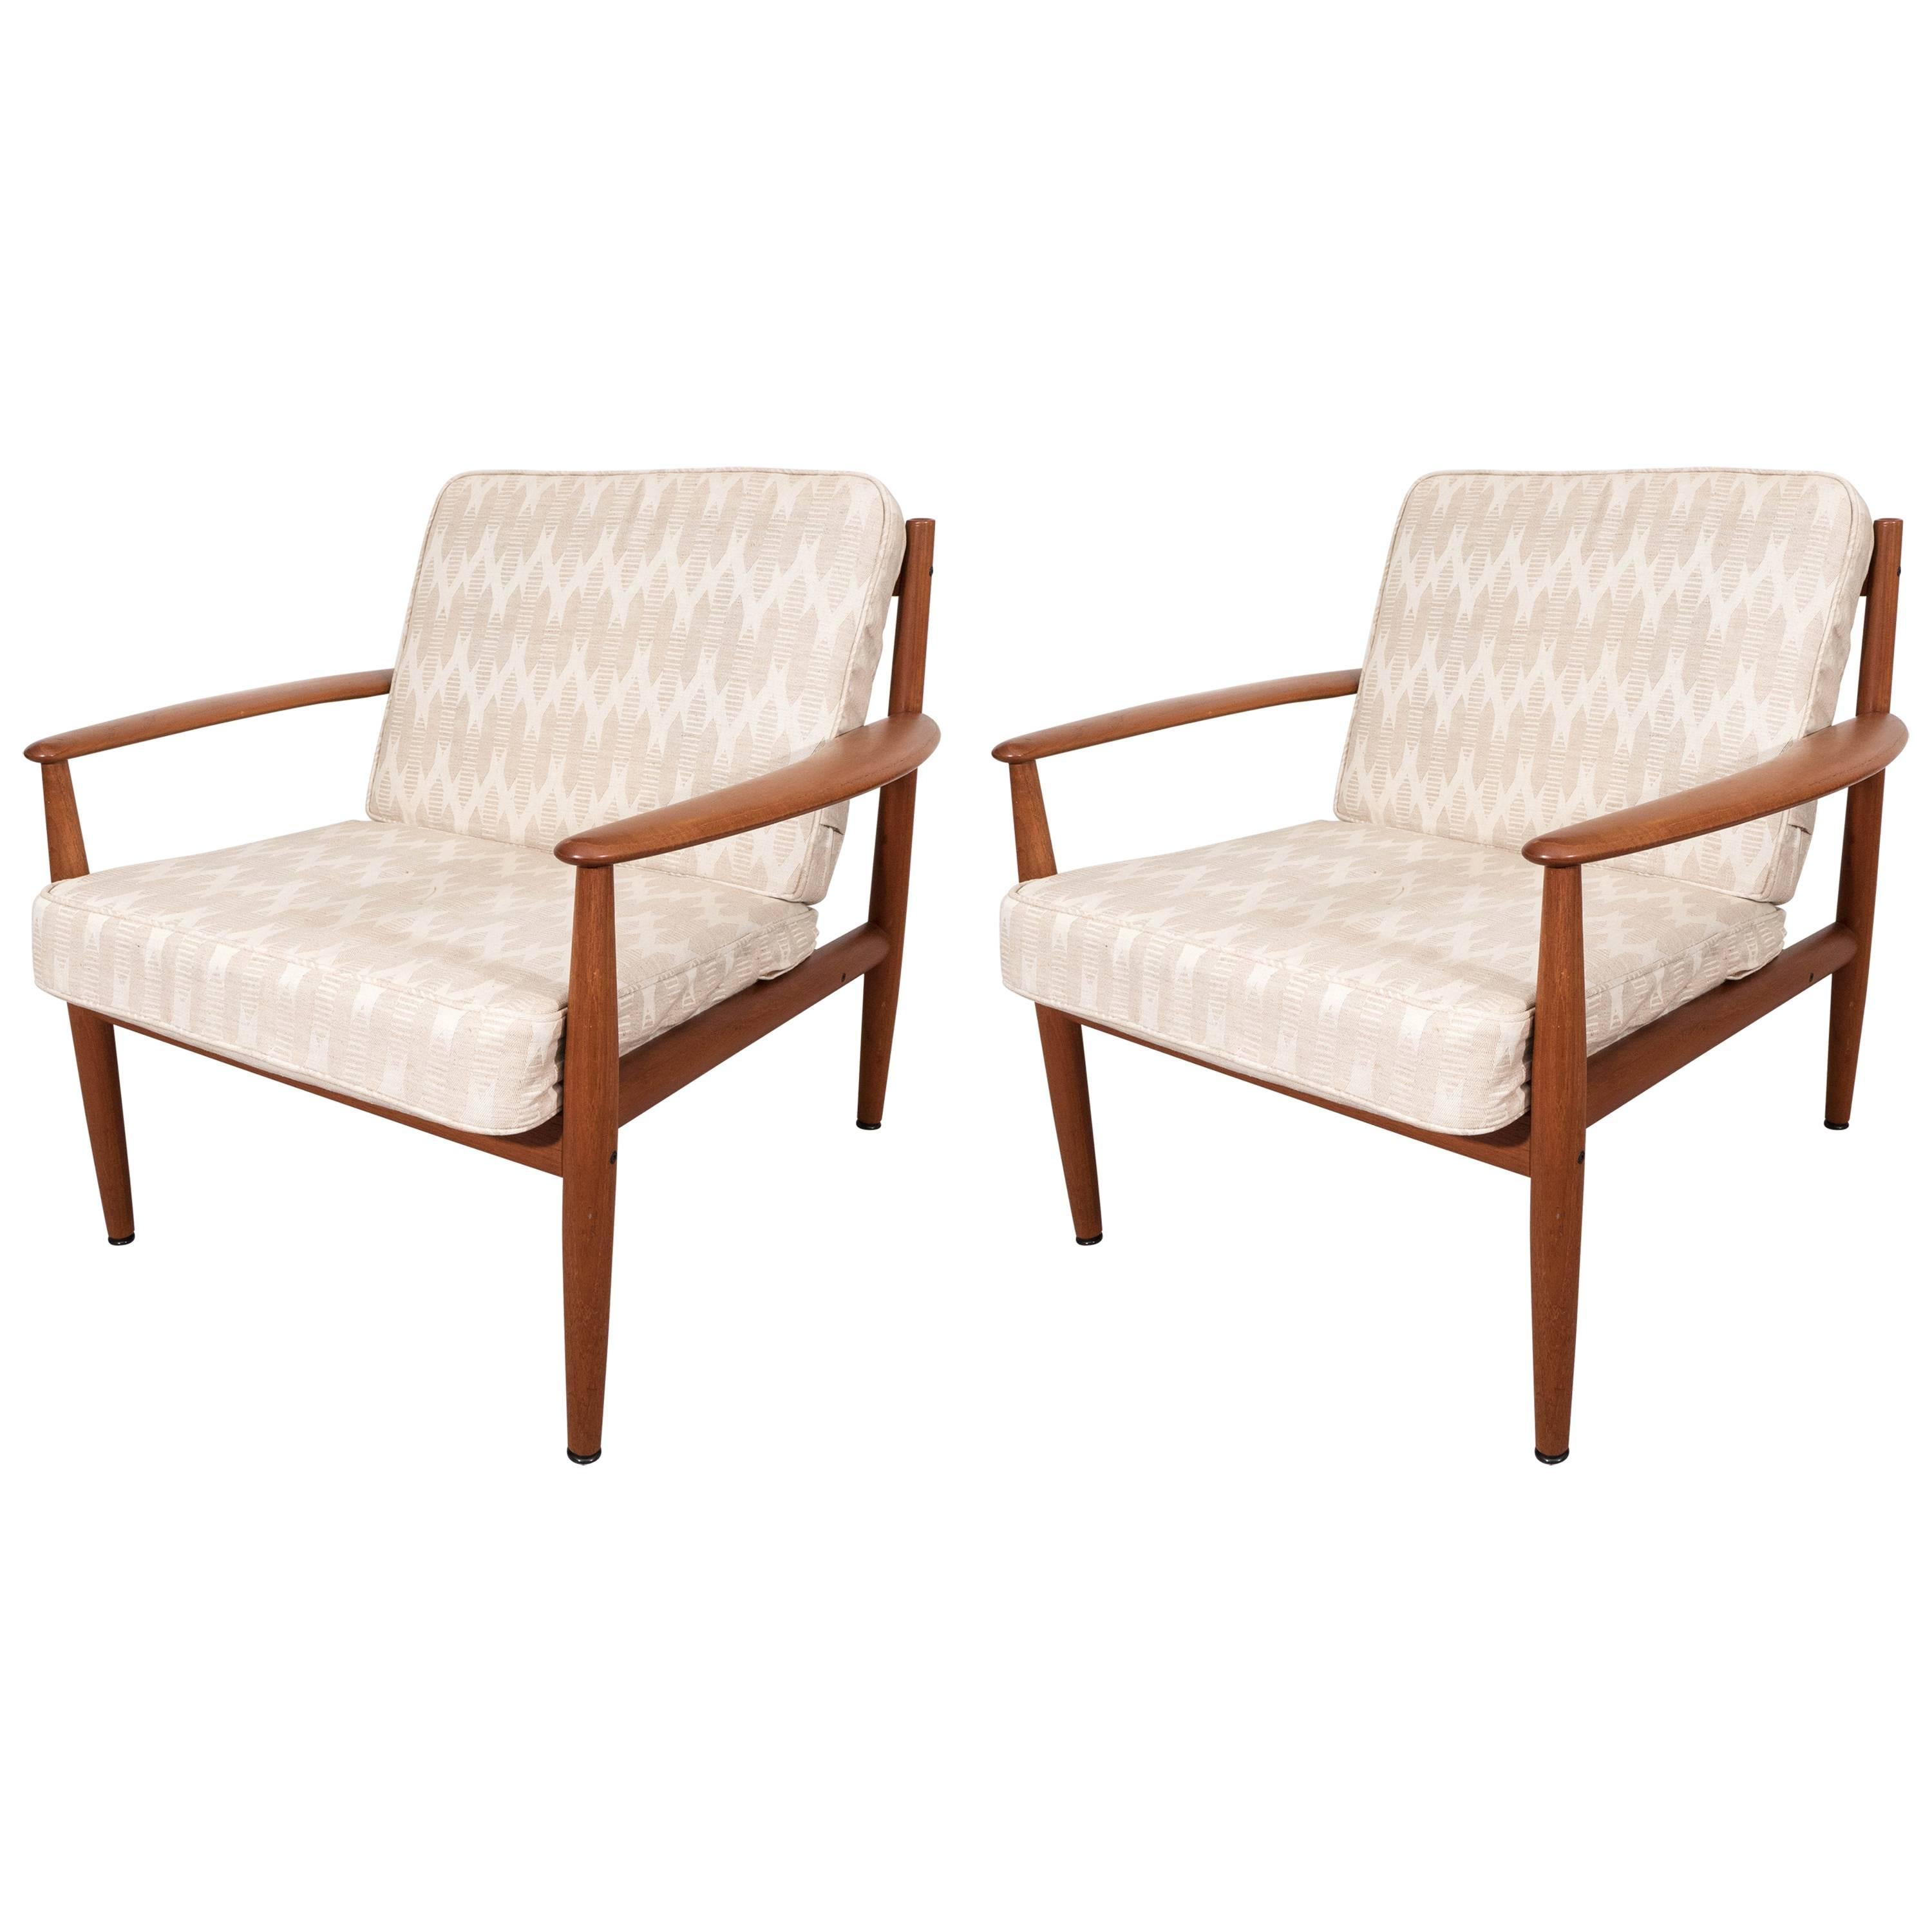 Pair of Grete Jalk Scandinavian Modern Teak Armchairs for France and Son